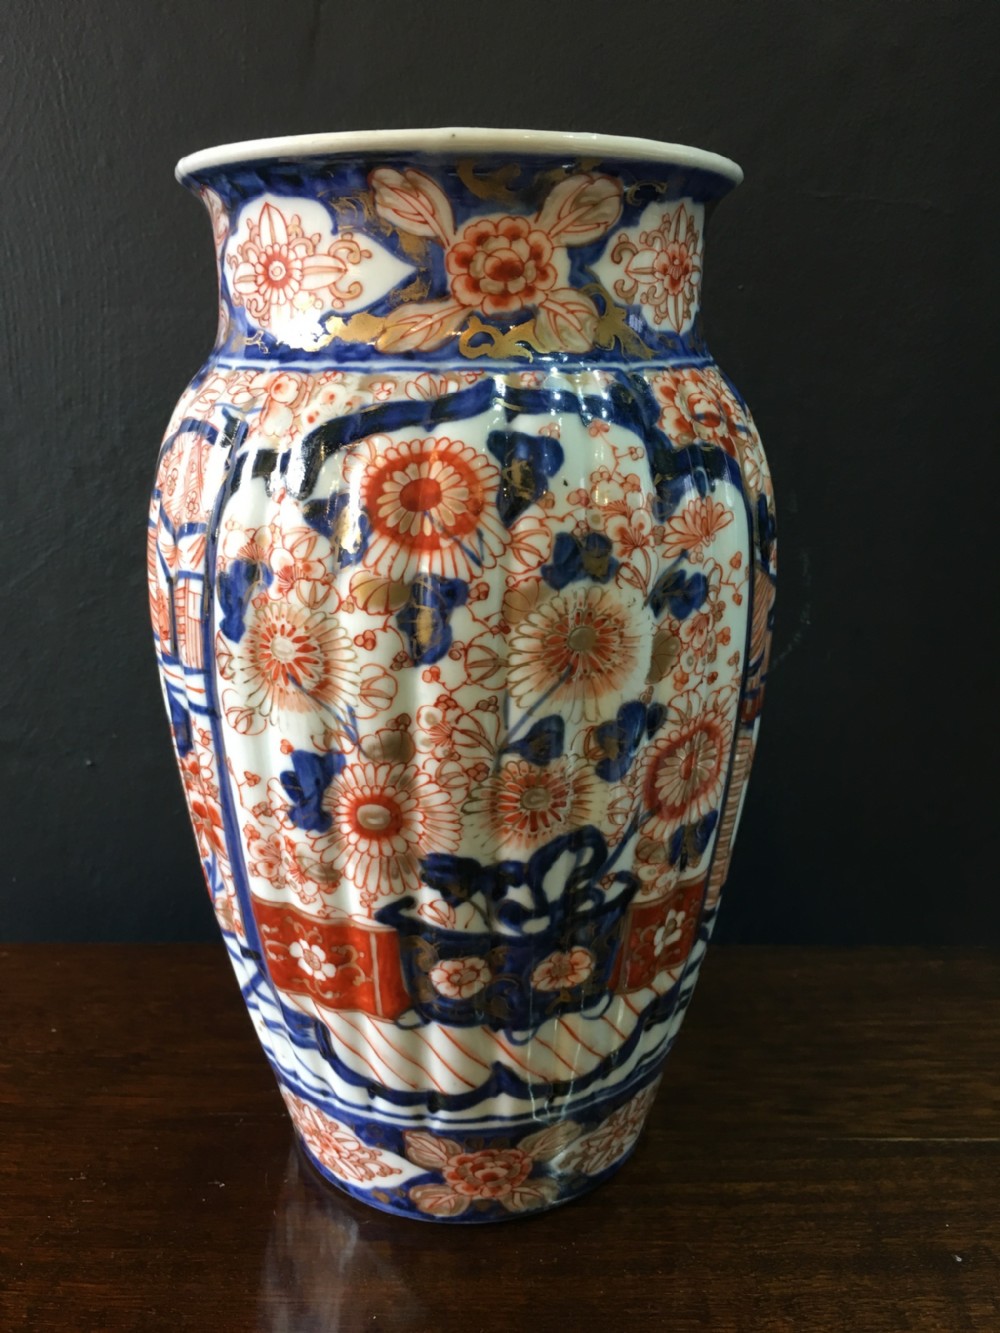 meiji period fluted vase chrysanthemum in main cartouchesfigures in boat cottage c19th